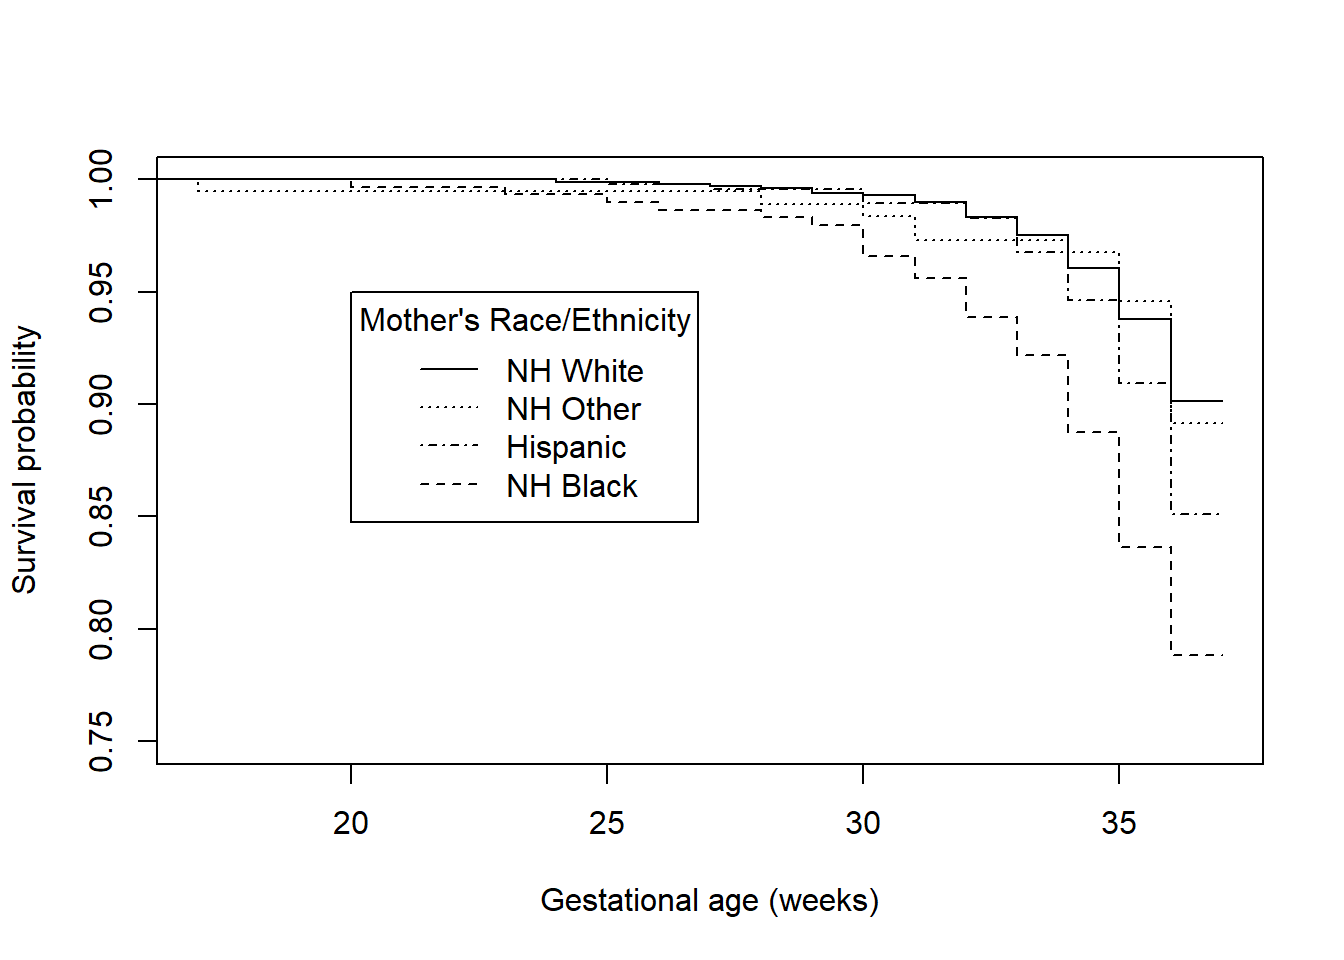 Survival functions for time to preterm birth by race/ethnicity